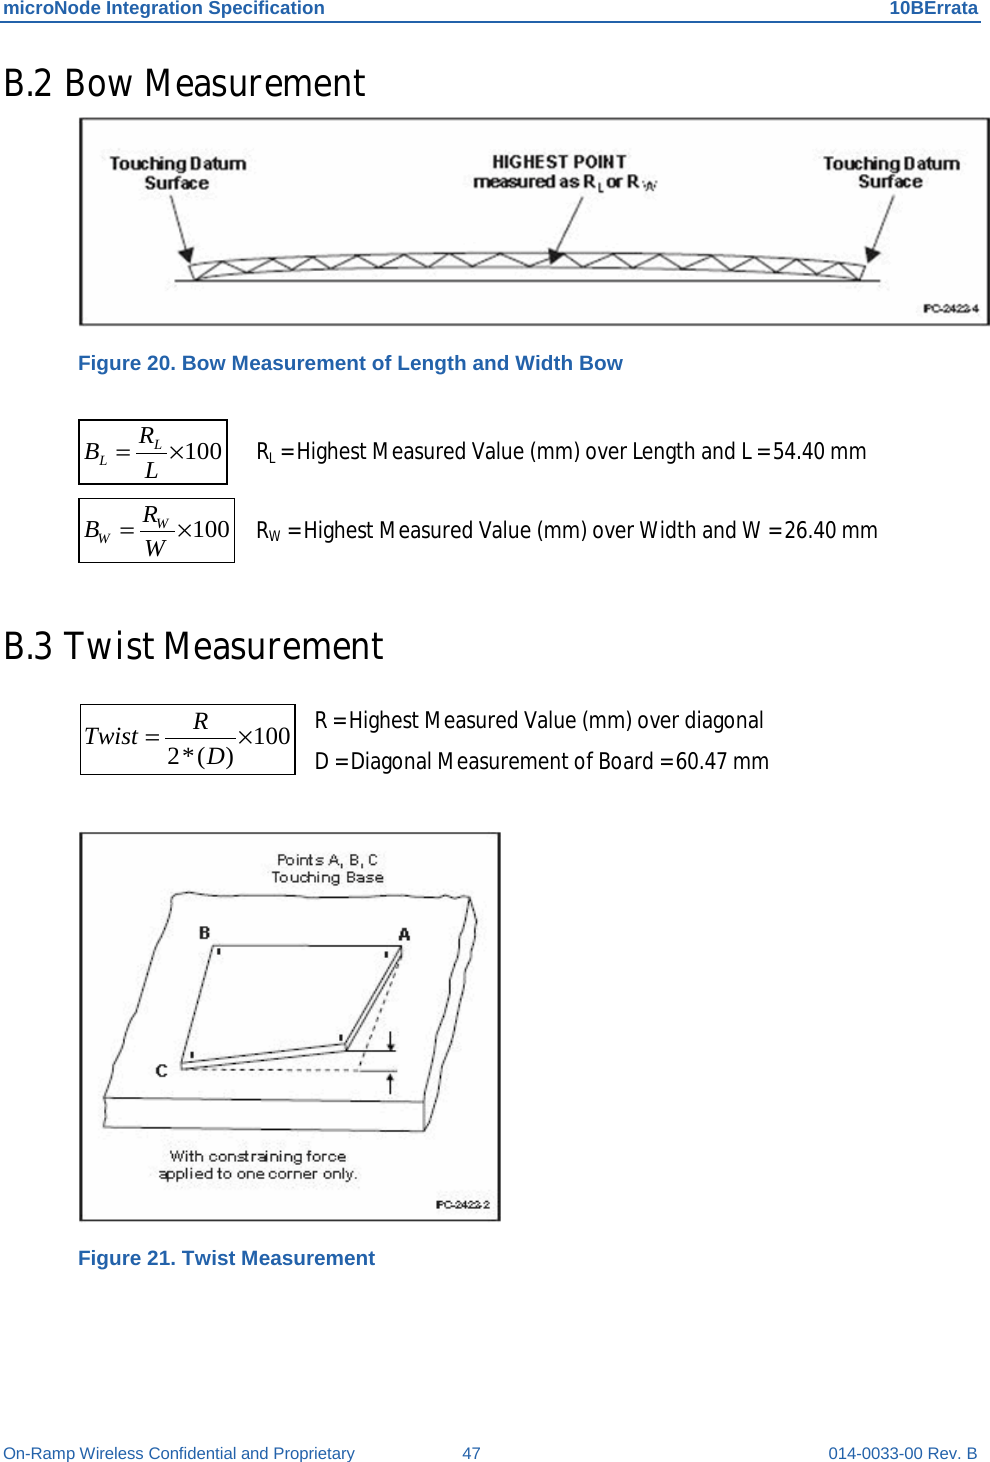 microNode Integration Specification 10BErrata On-Ramp Wireless Confidential and Proprietary 47 014-0033-00 Rev. B B.2 Bow Measurement  Figure 20. Bow Measurement of Length and Width Bow  100×= LRBLL  RL = Highest Measured Value (mm) over Length and L = 54.40 mm 100×= WRBWW RW = Highest Measured Value (mm) over Width and W = 26.40 mm  B.3 Twist Measurement   R = Highest Measured Value (mm) over diagonal     D = Diagonal Measurement of Board = 60.47 mm   Figure 21. Twist Measurement   100)(*2 ×= DRTwist